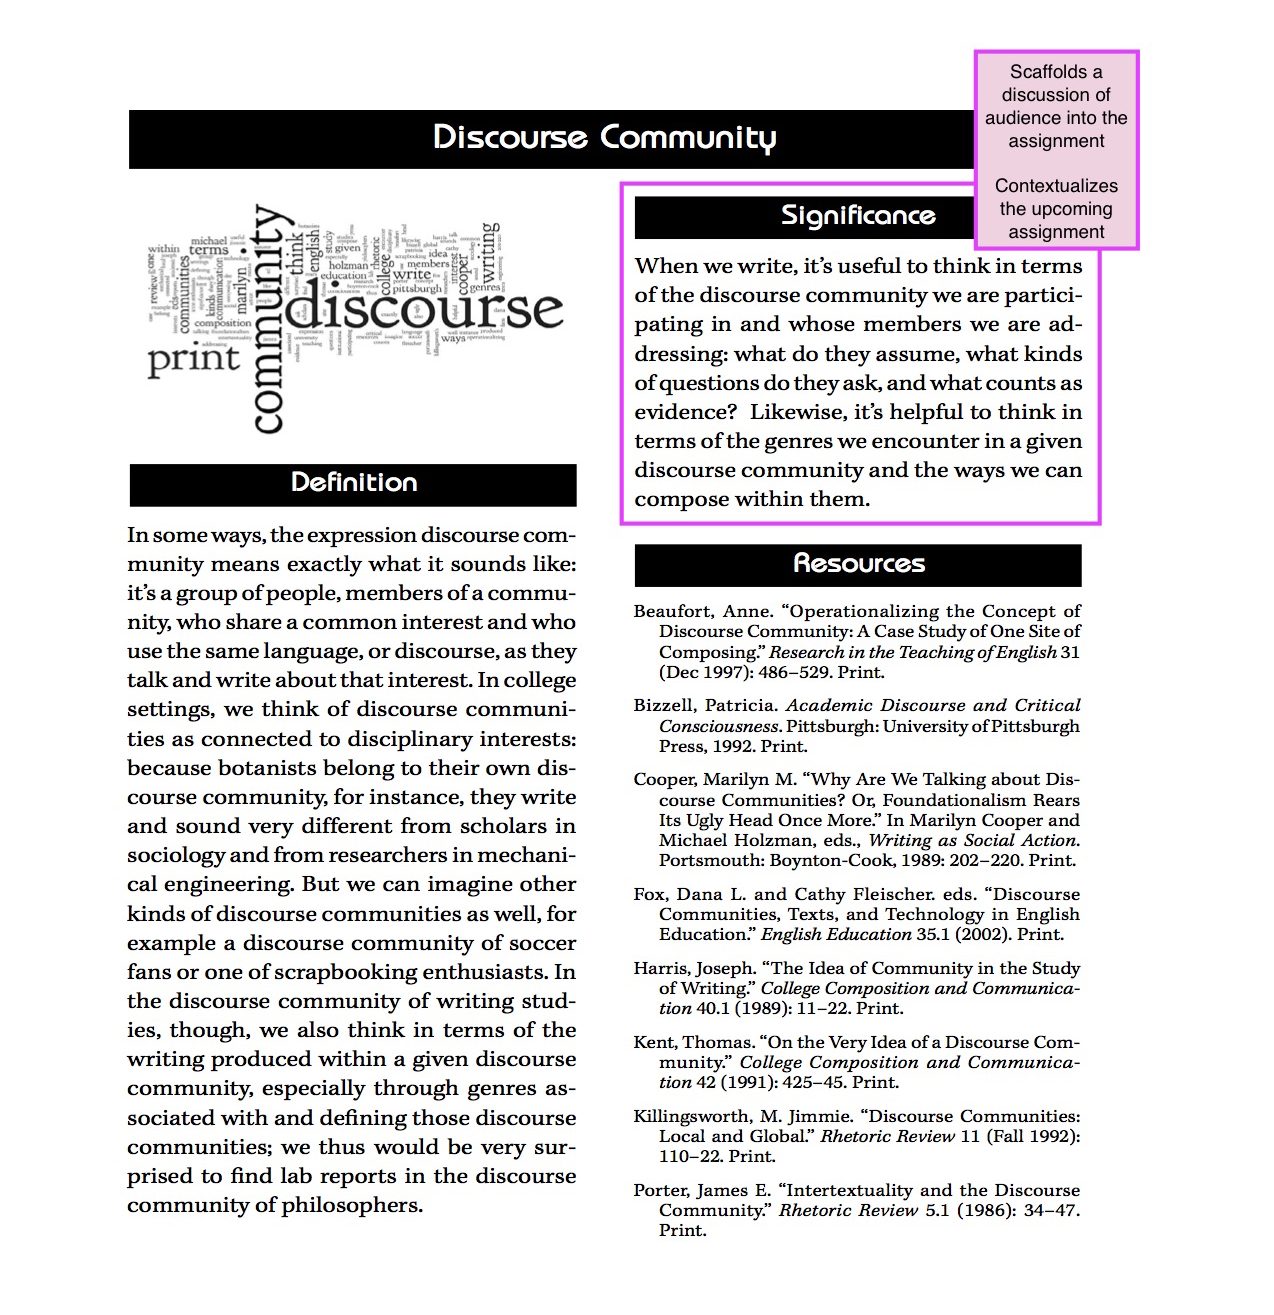 First page: NCTE's multimodal definition of 'discourse community.' Markup highlights the significance section.